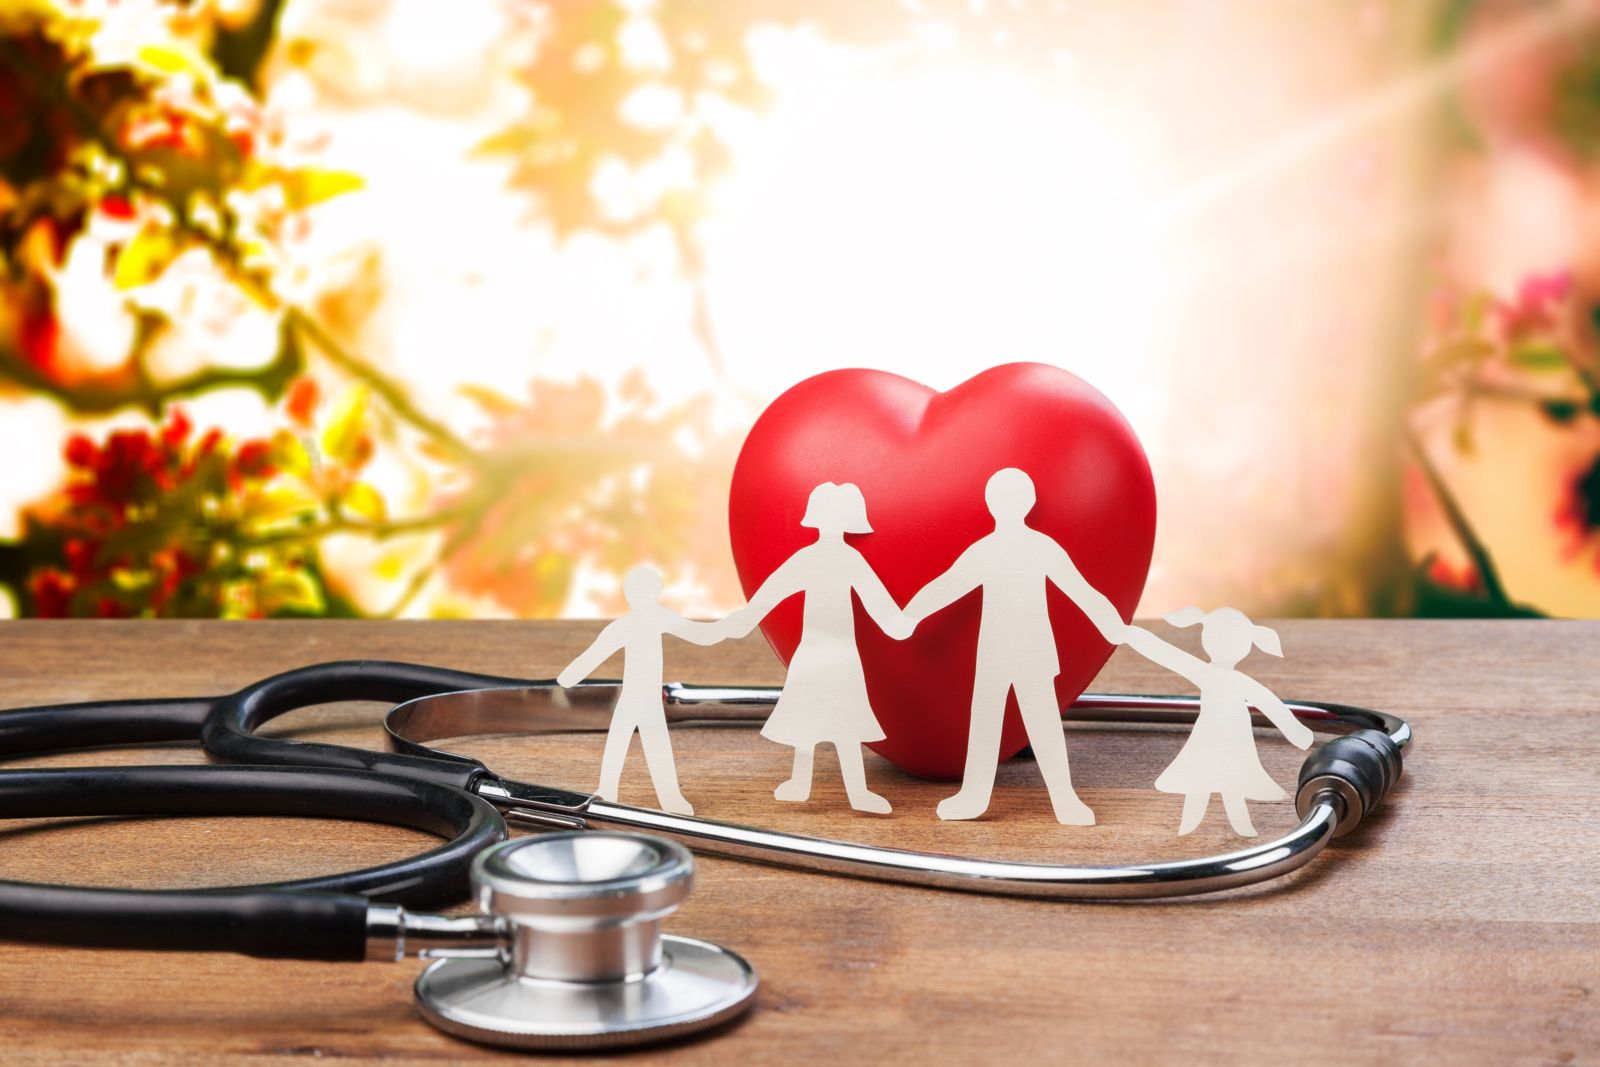 White paper cutouts of a Father, mother, and two children holding hands with a red wooden heart behind them. The heart and paper cutouts are inside the head portion of a stethoscope on top of a wooden surface with a tree branch and white light in the background.